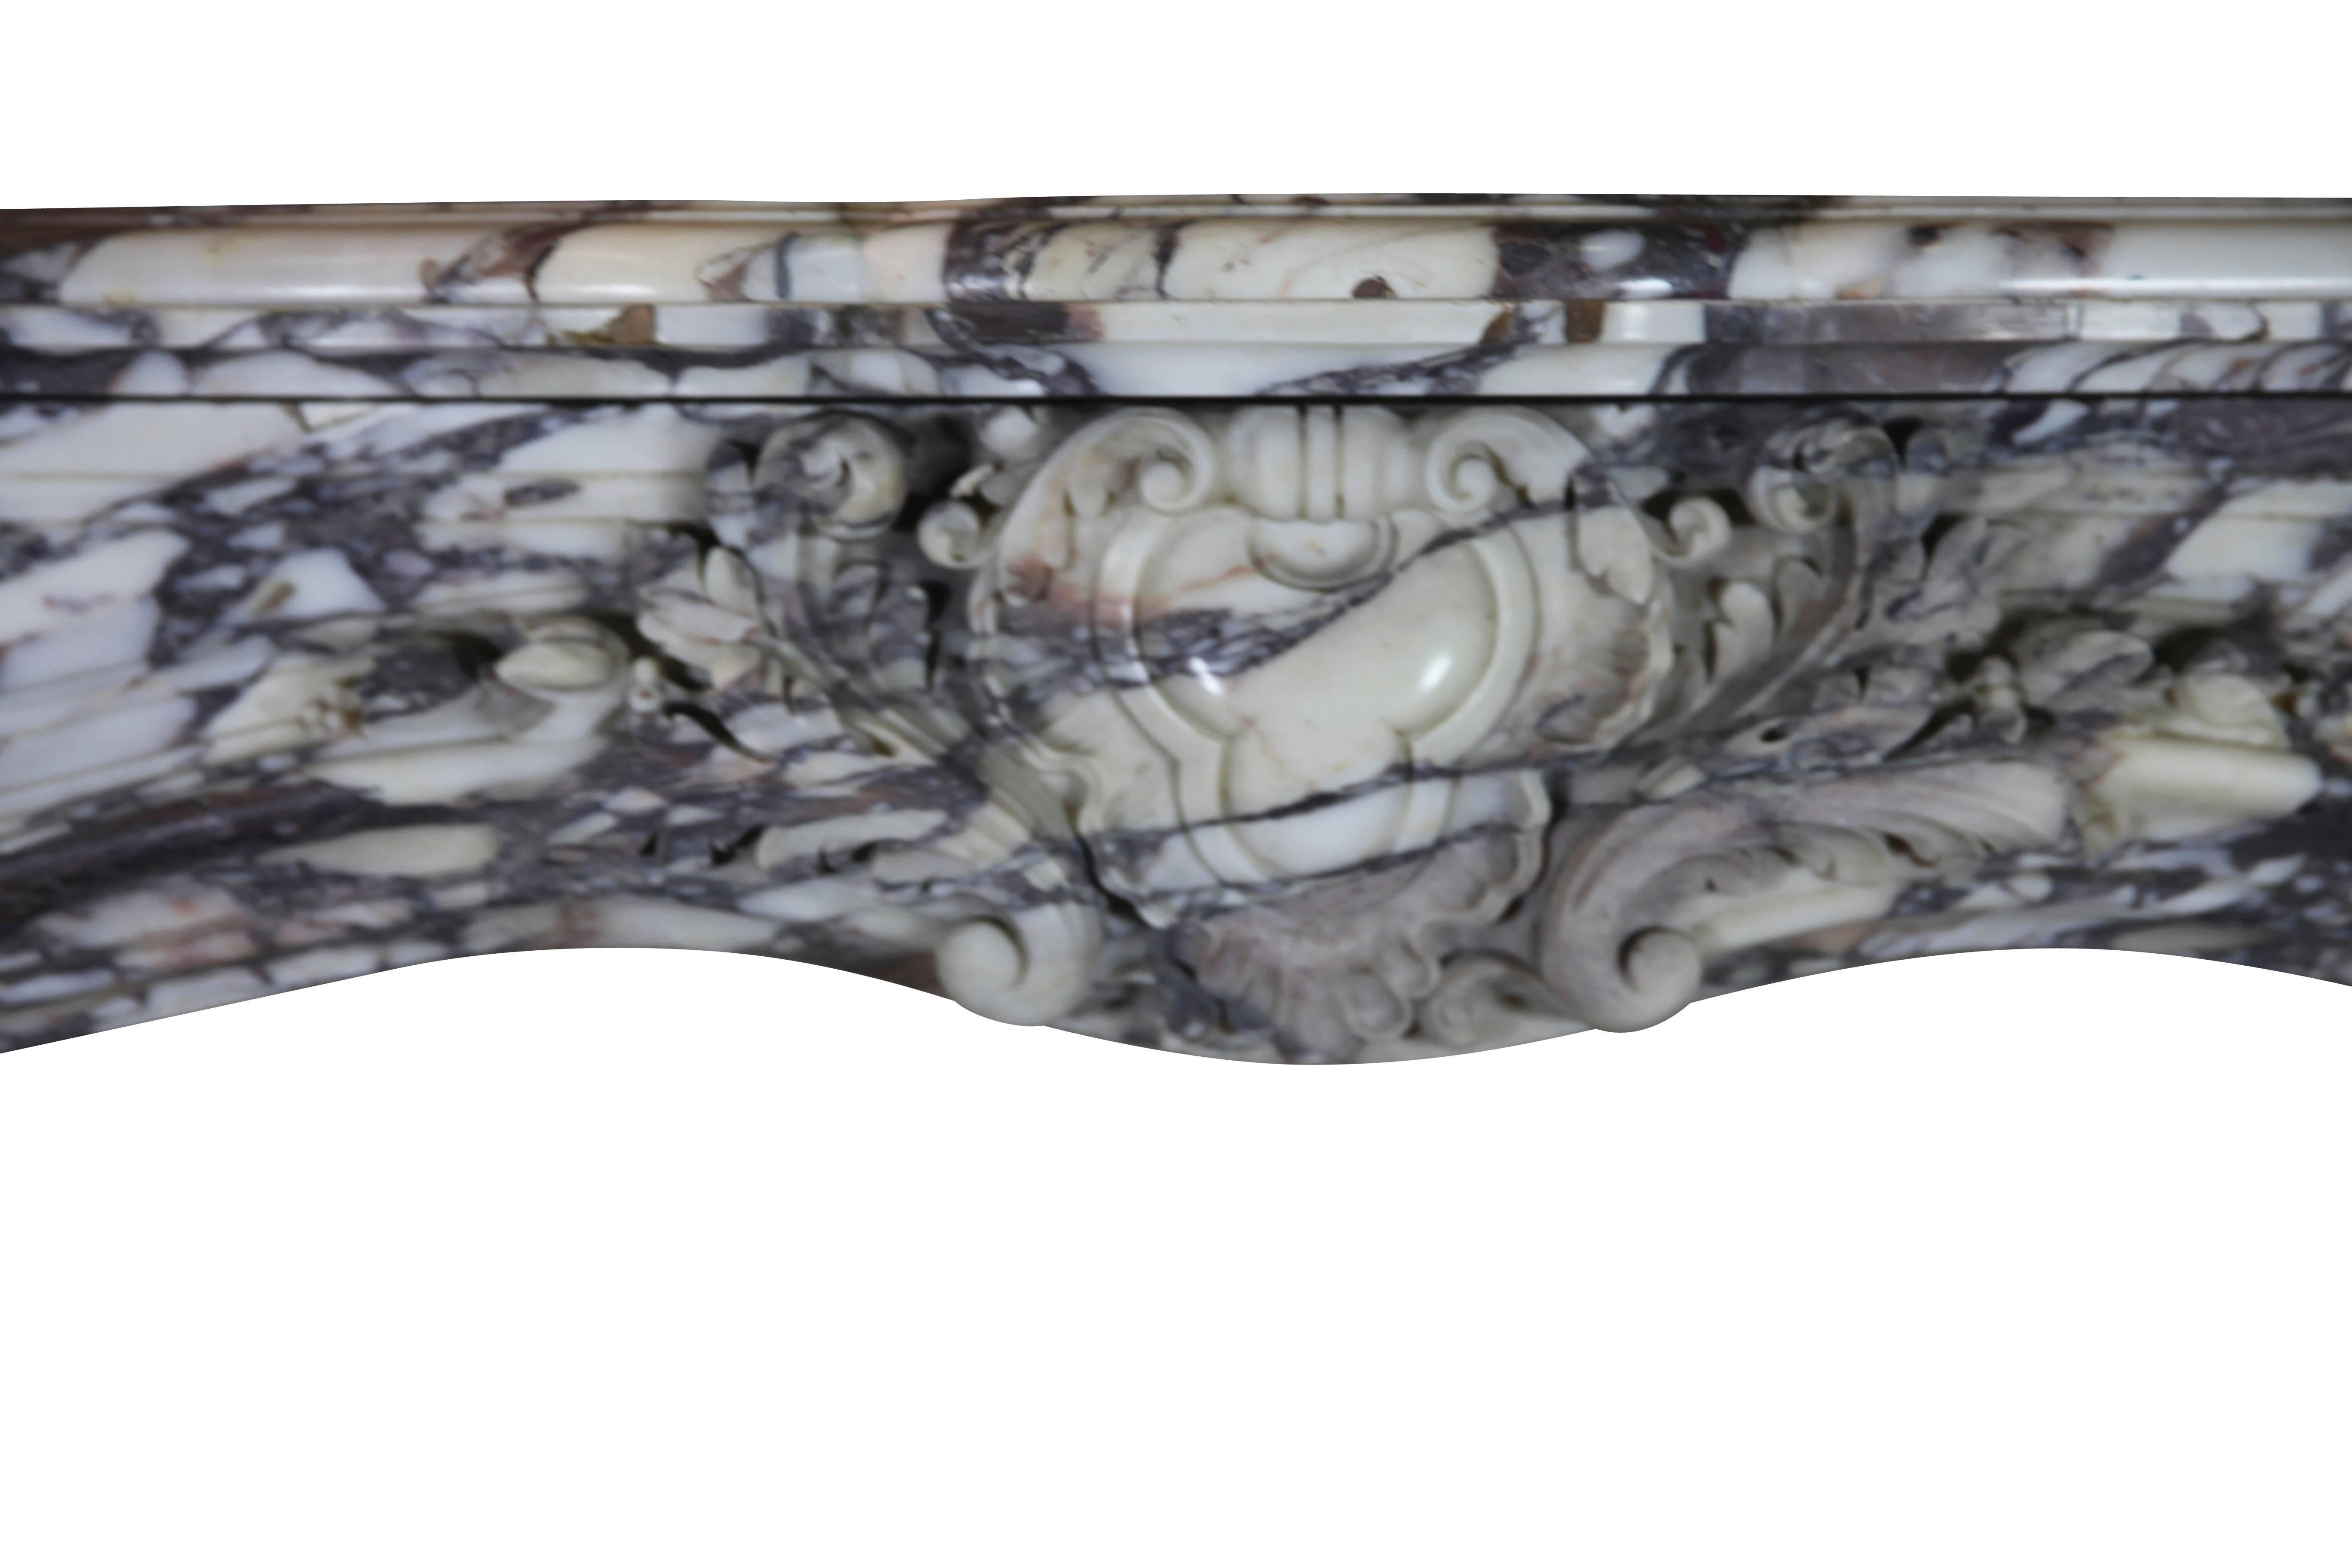 Original antique fireplace surround in the Royal Breche violet marble. This mantle was installed in a panel room. The colors of the Royal Brêche violet marble are deep and rich. A perfect fit for an opulent timeless interior design. This